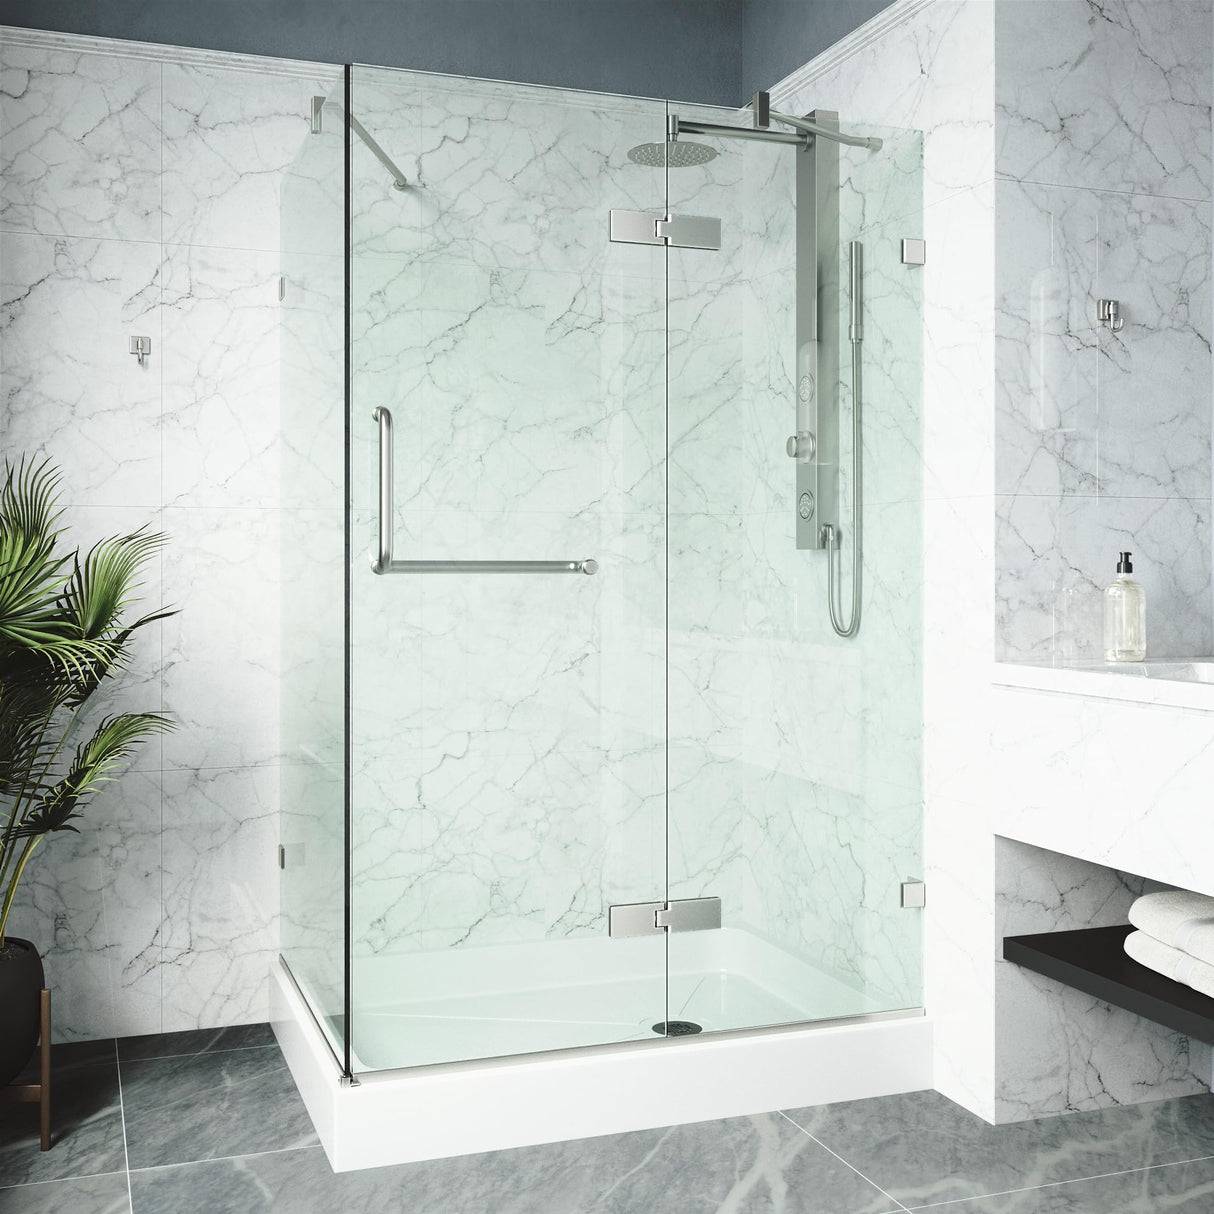 VIGO 32 in. x 48 in. x 79 in. Monteray Frameless Hinged Rectangle Shower Enclosure with Clear 0.38" Tempered Glass and Hardware in Brushed Nickel Finish with Left Handle and Base - VG6011BNCL48WR